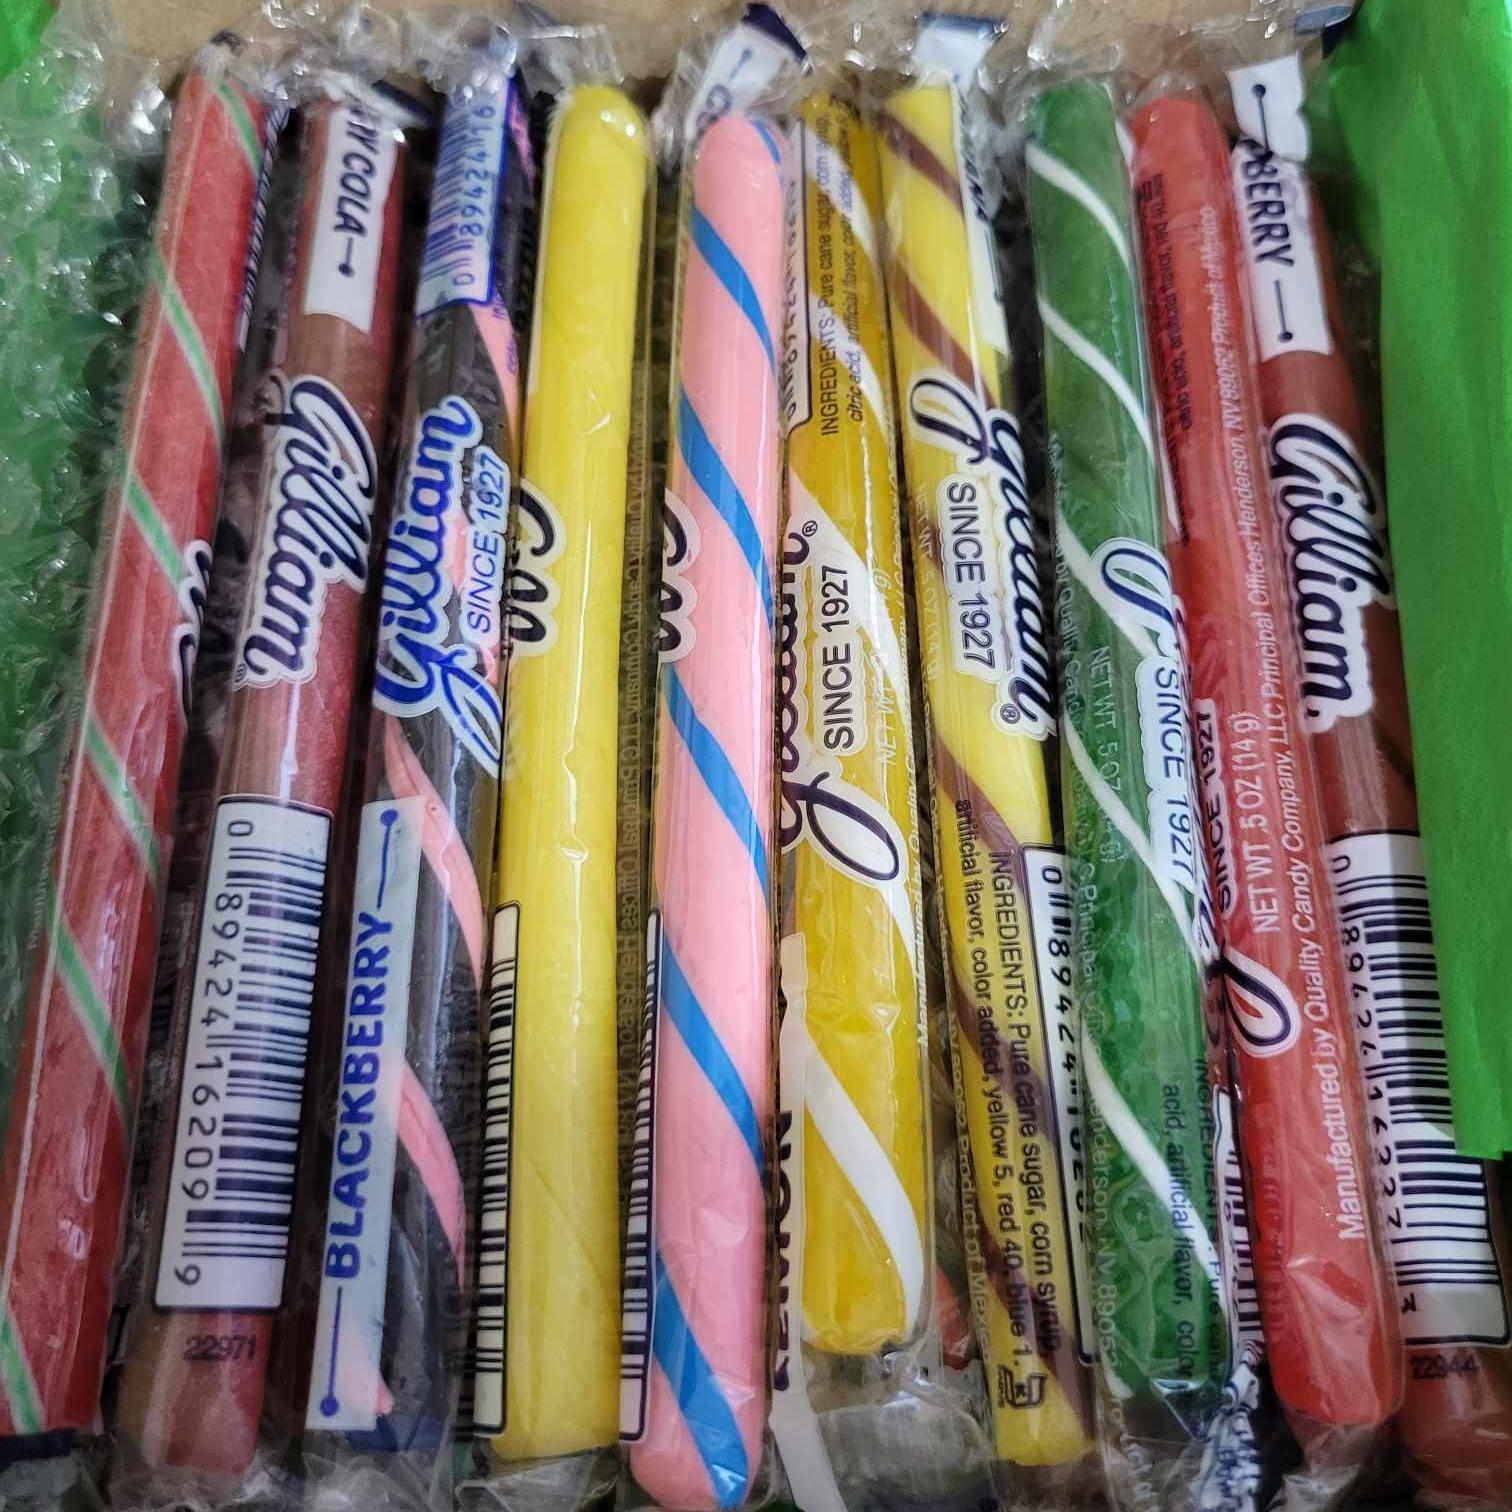 Gilliam Old Fashioned Candy Sticks - Dusty's Country Store